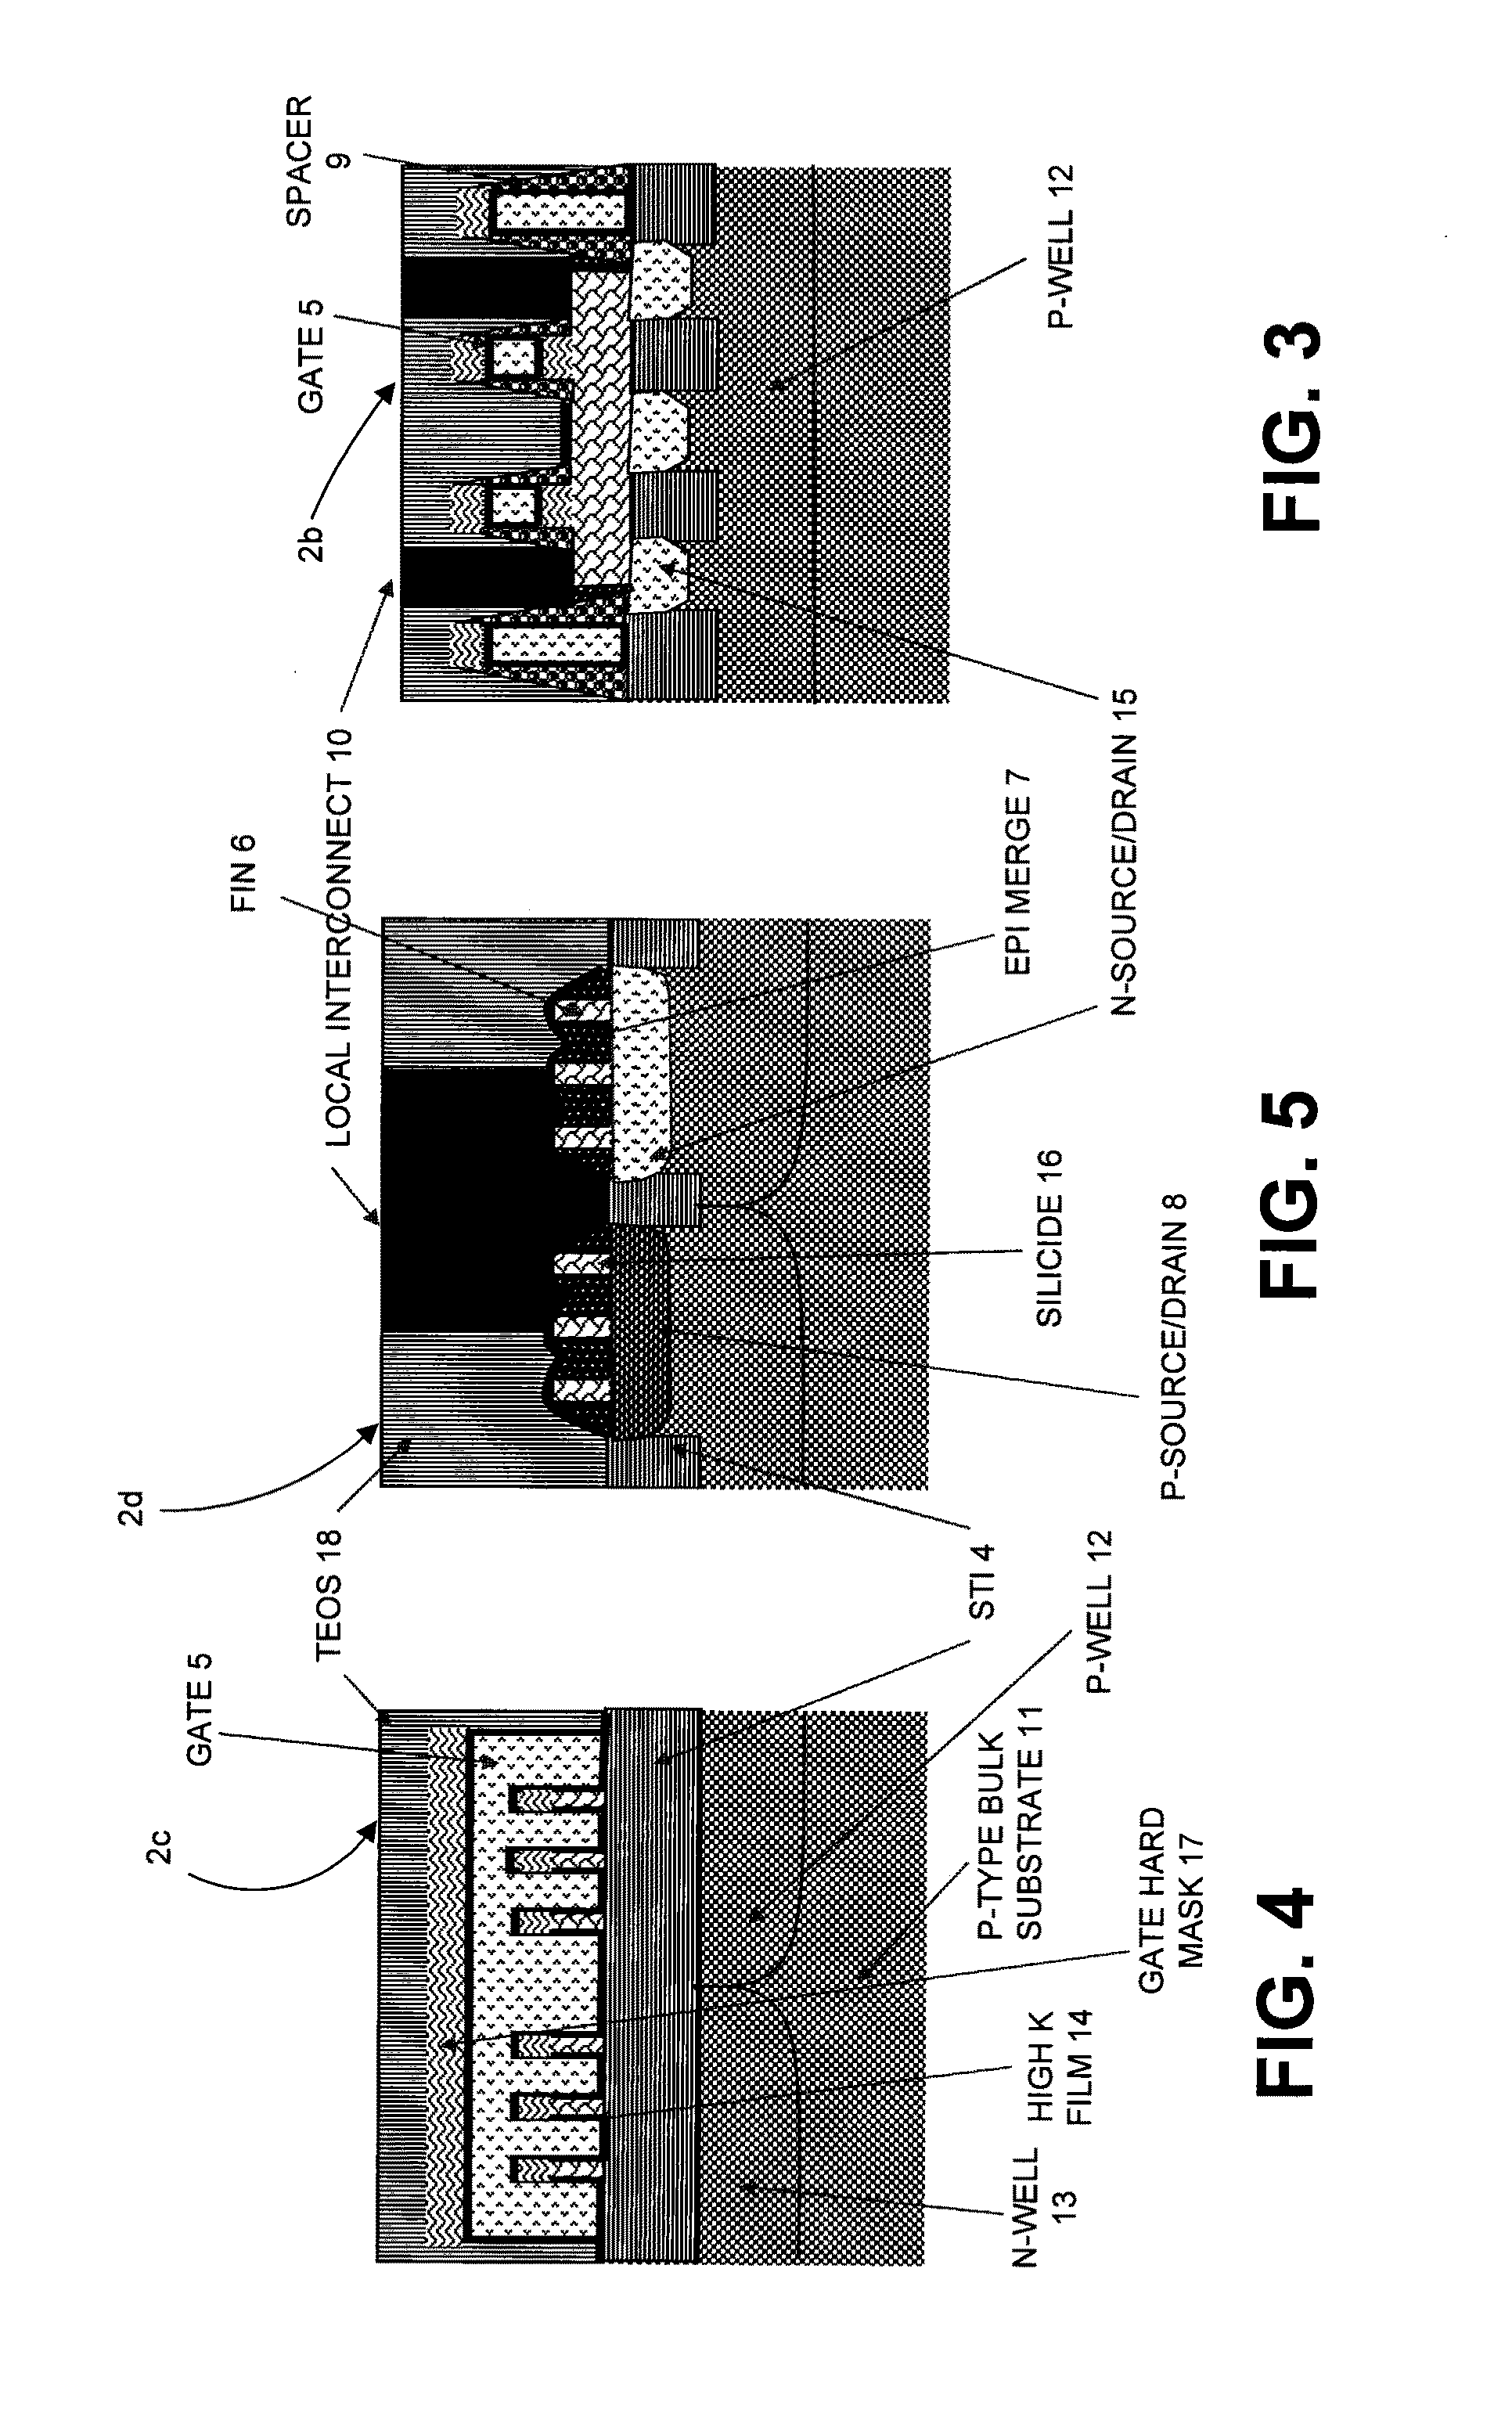 Process for Forming FINS for a FinFET Device